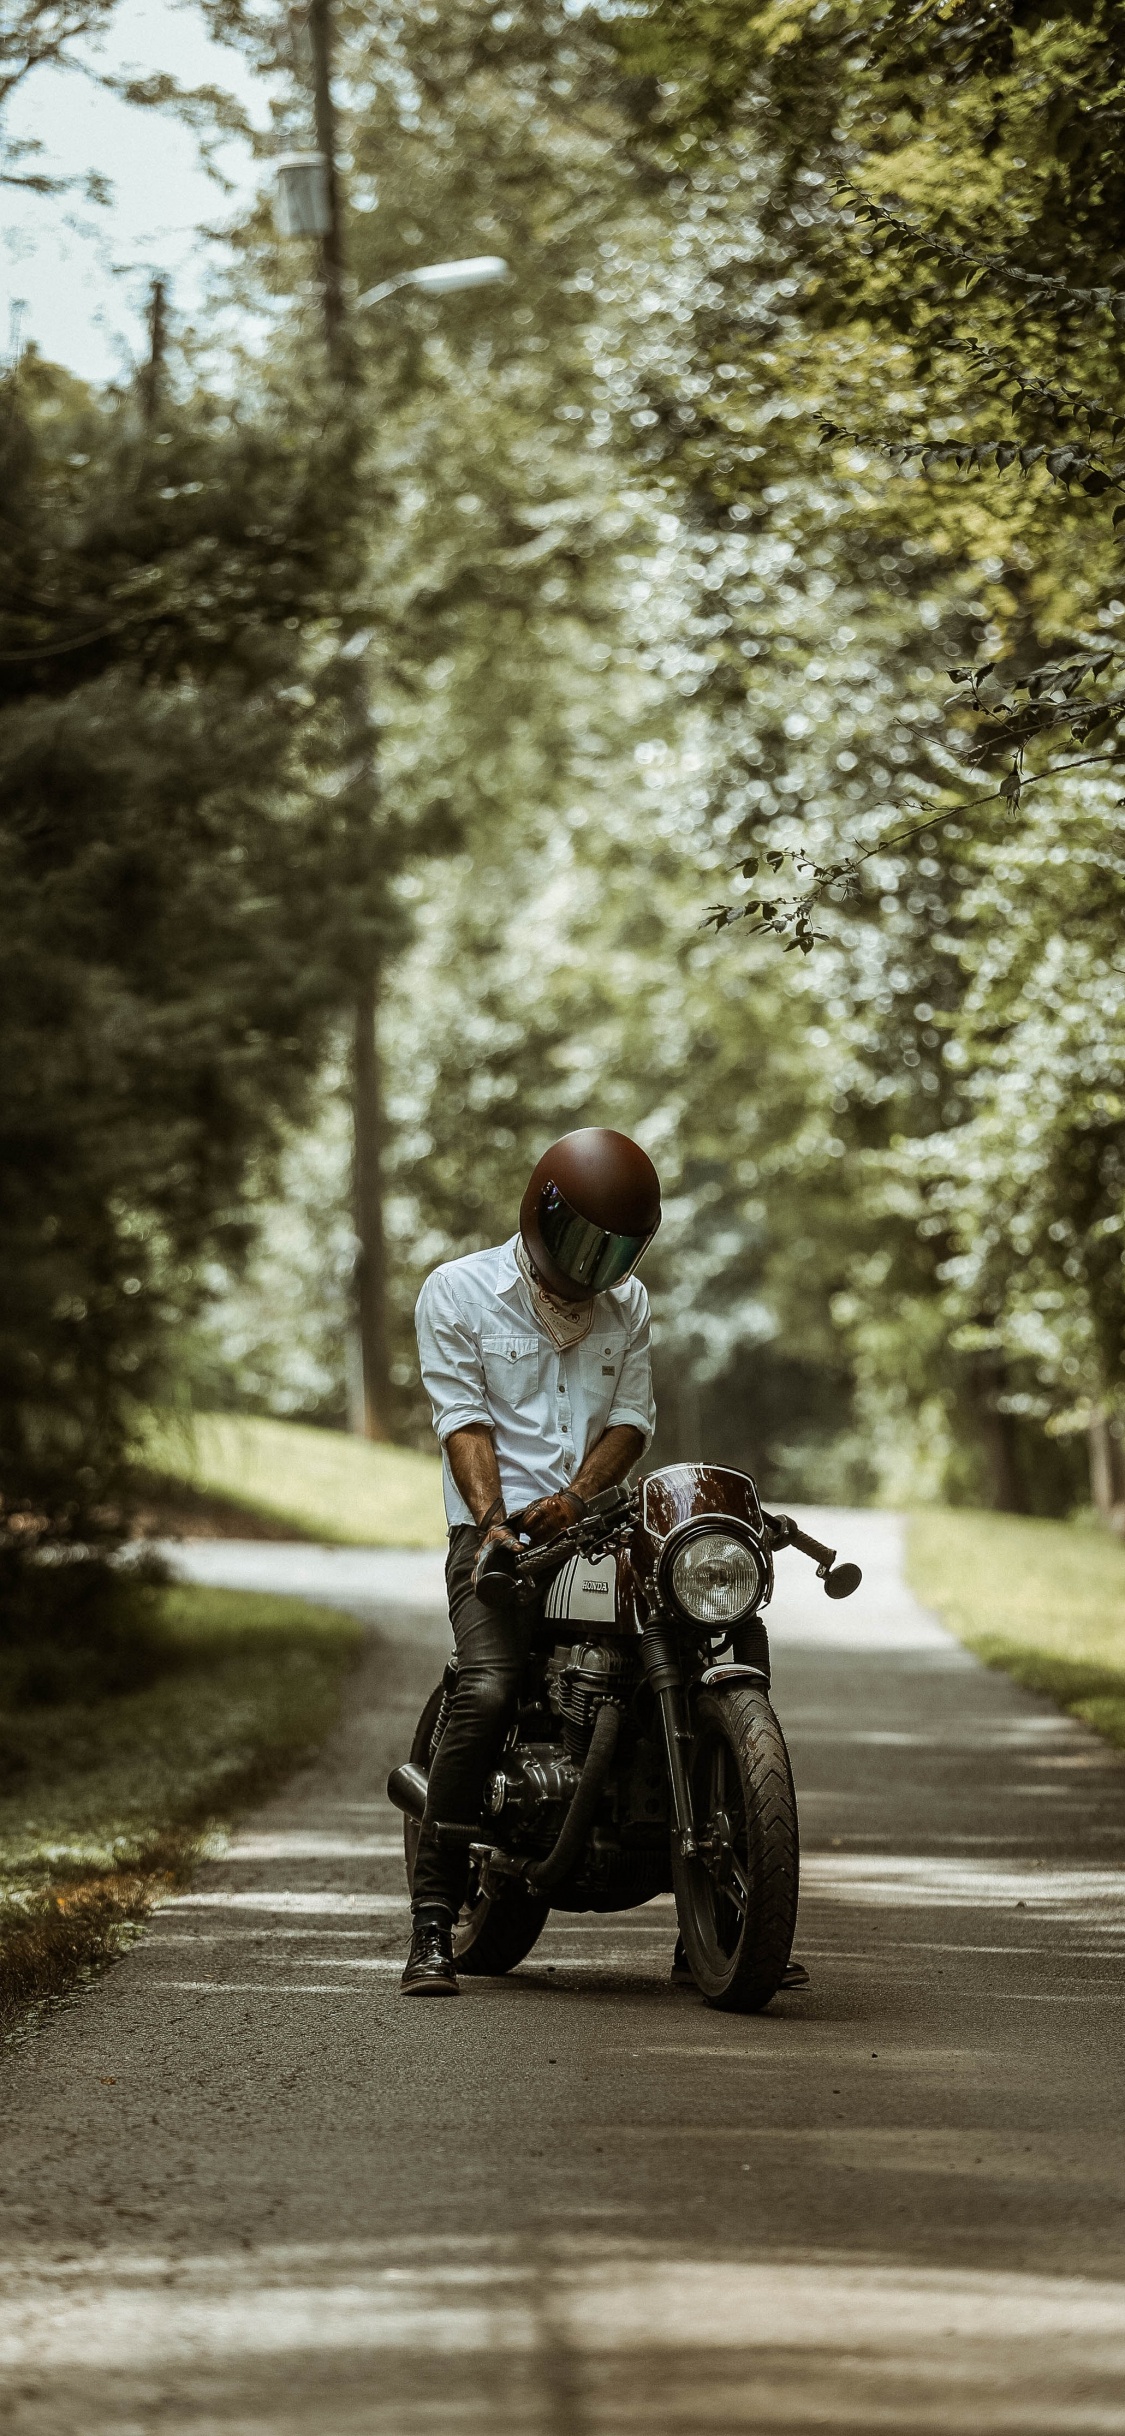 Man in White Shirt Riding Motorcycle on Road During Daytime. Wallpaper in 1125x2436 Resolution